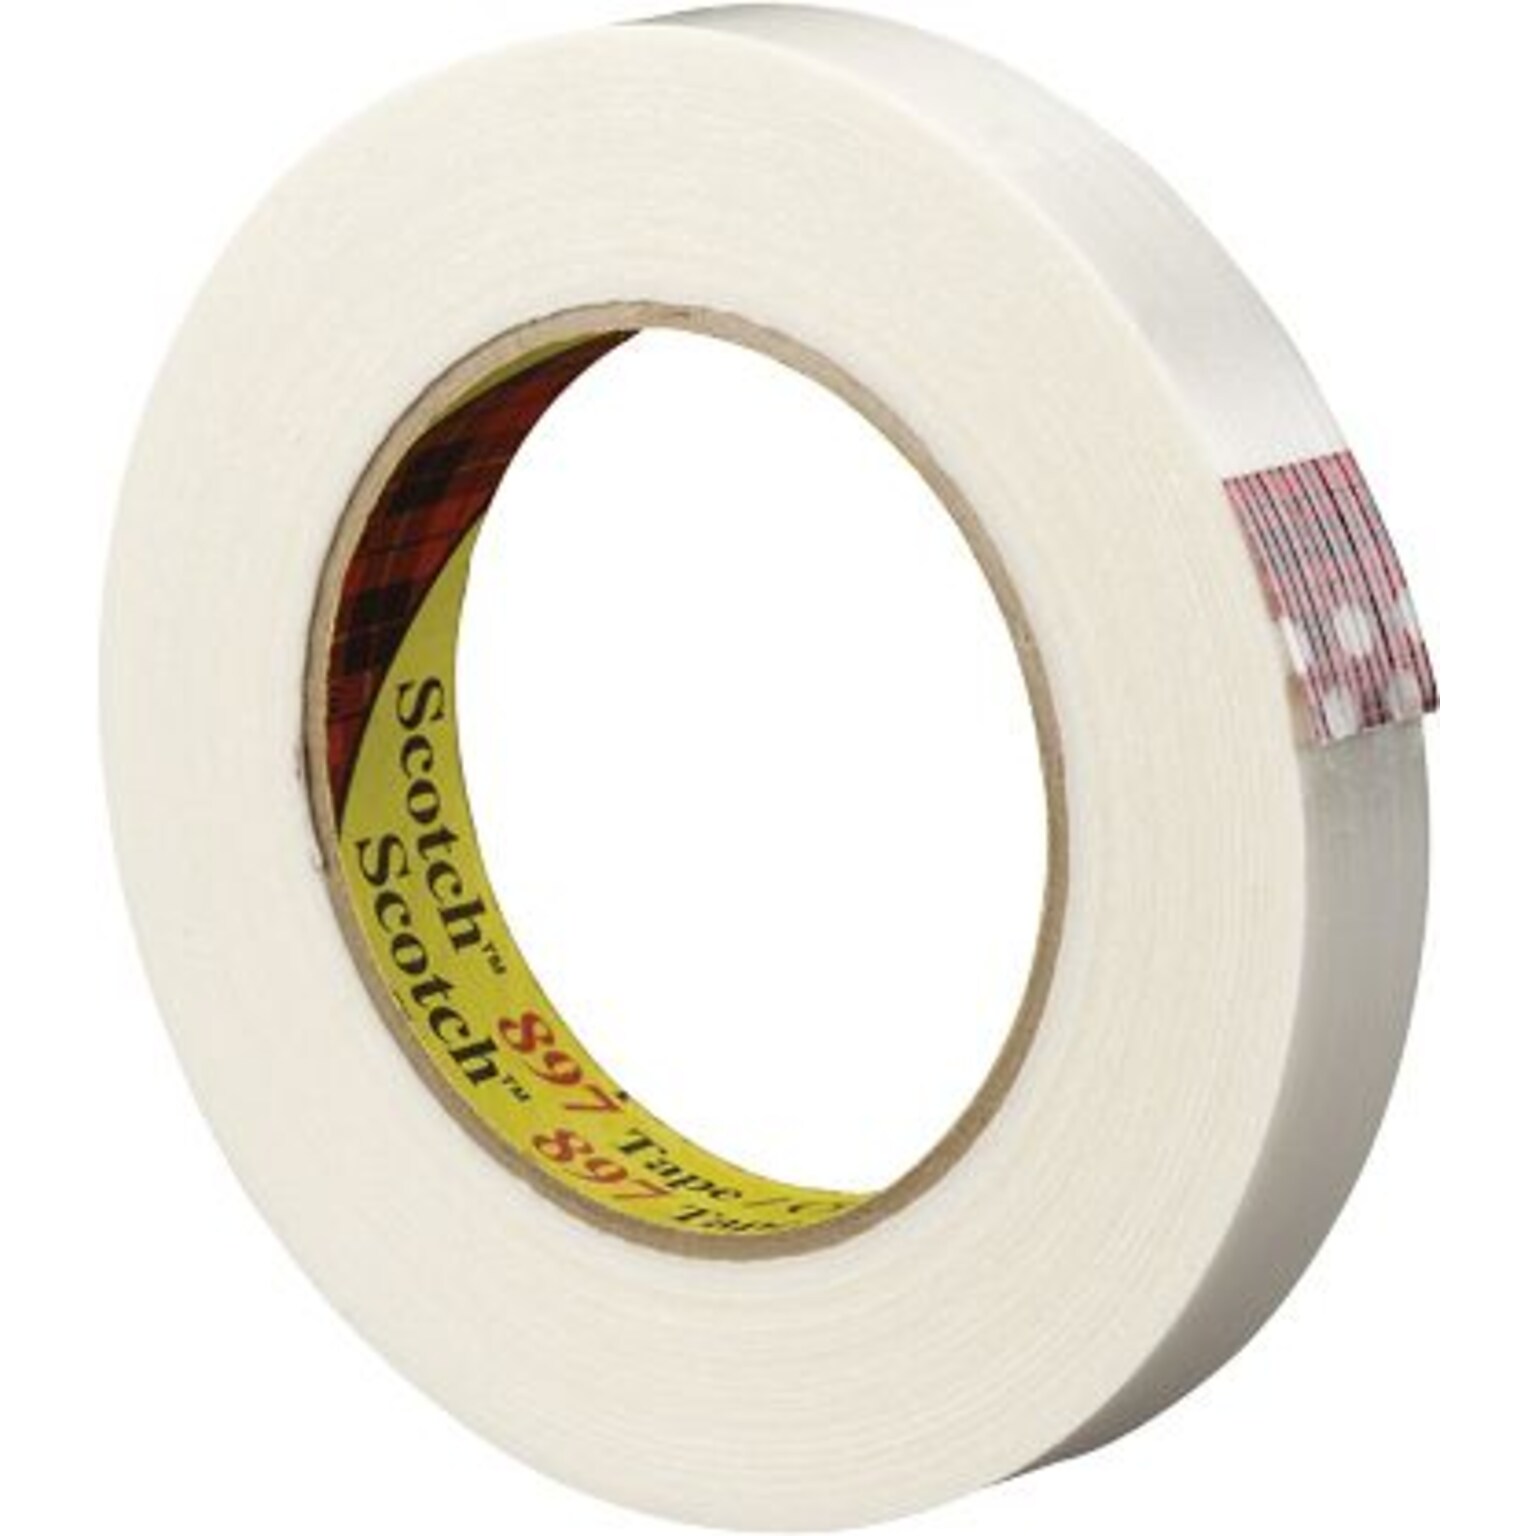 3M 897 6.0 Mil Strapping Tape, 3/4 x 60 yds., Clear, 12/Case (T91489712PK)